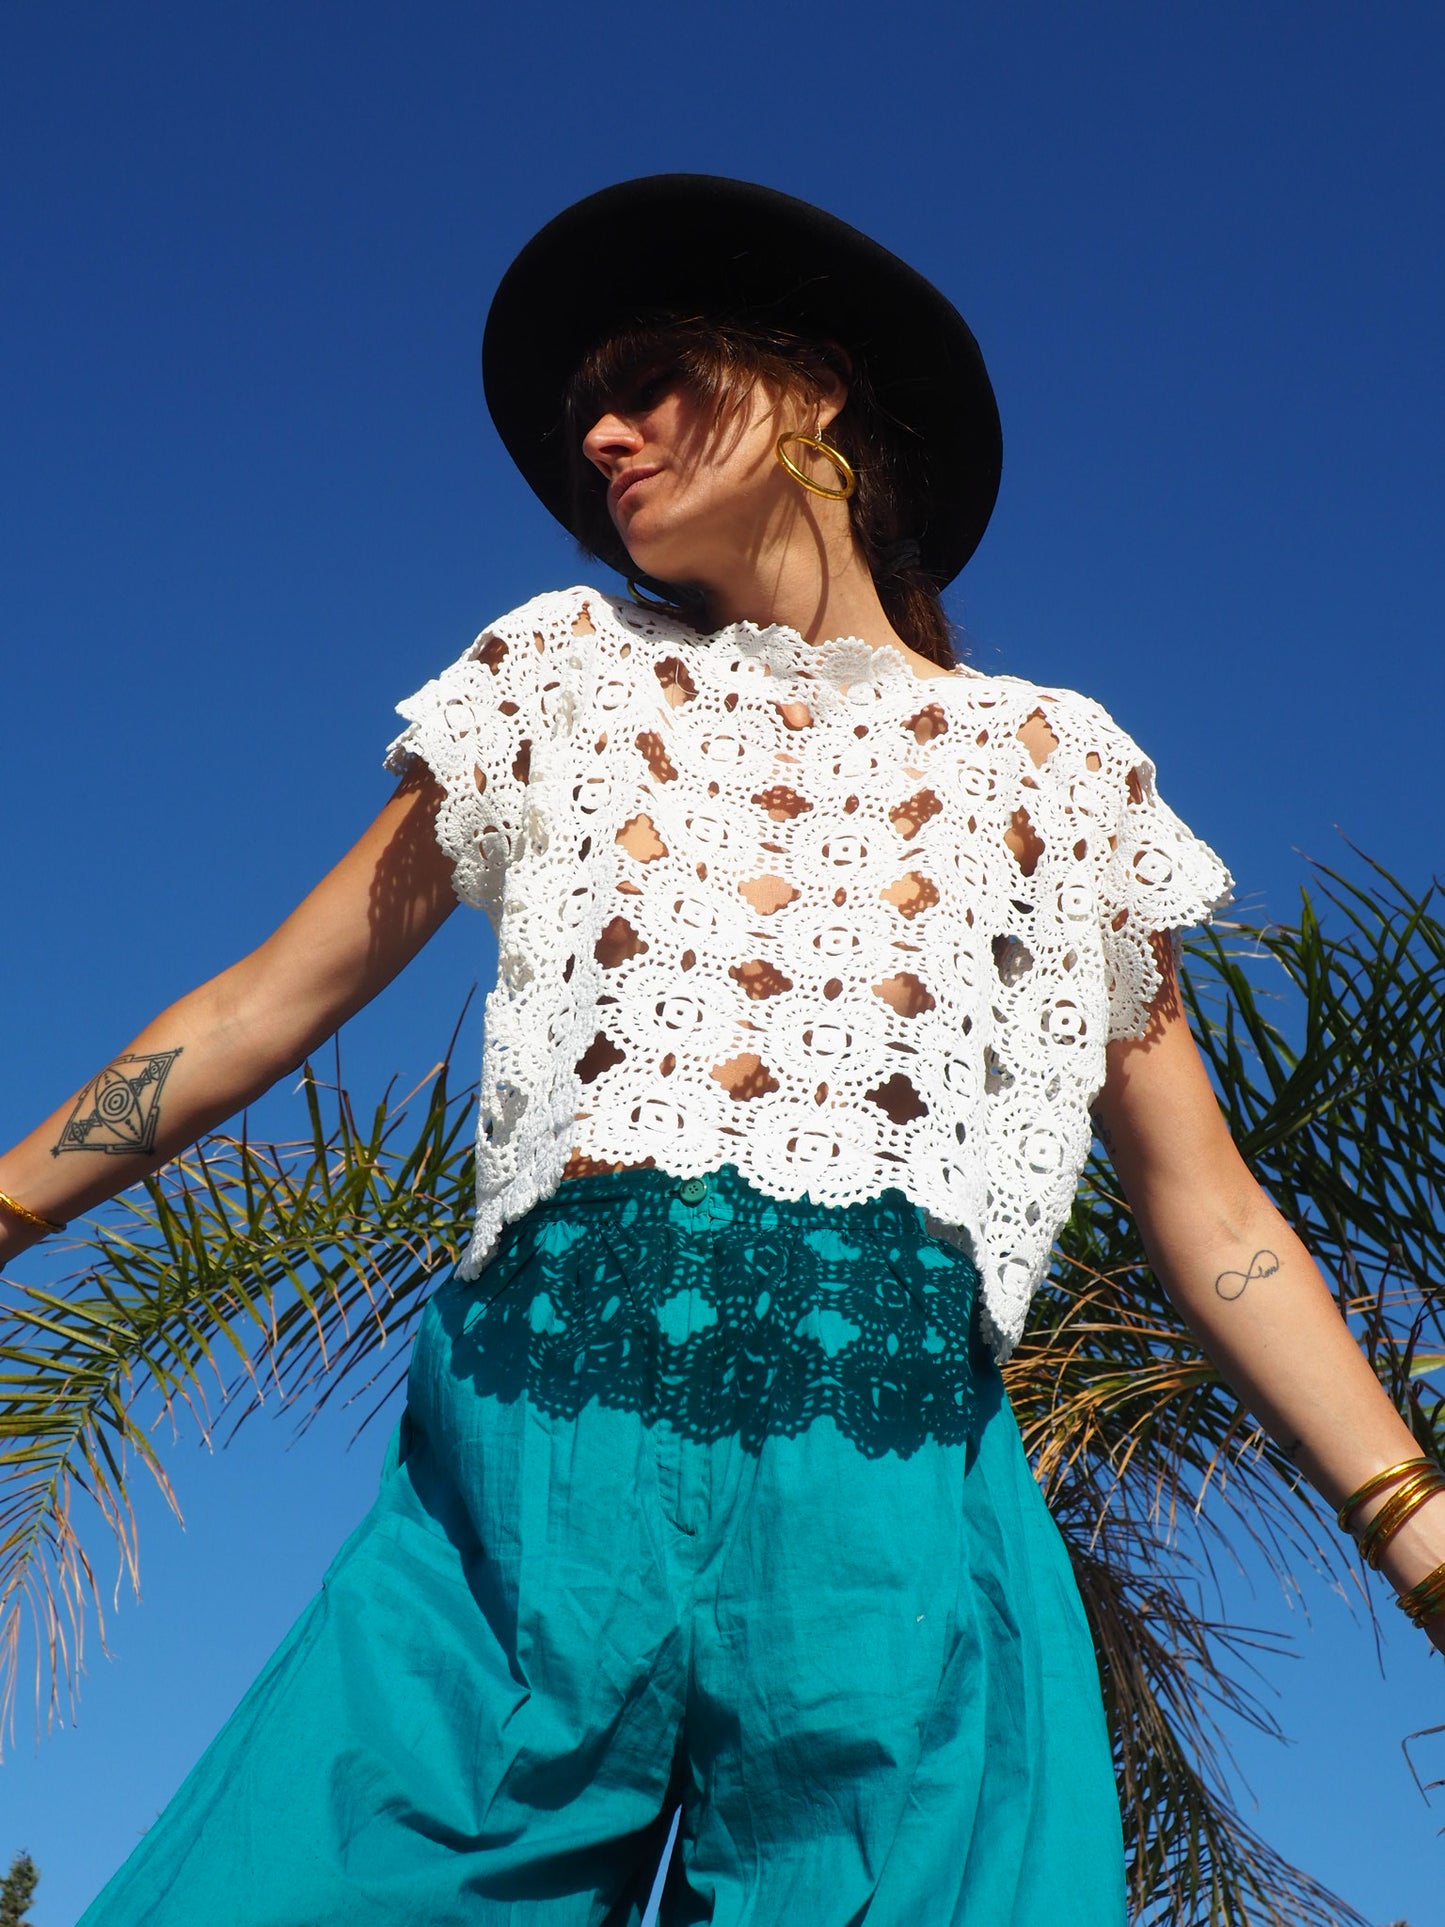 Antique vintage lace crochet up-cycled top by Vagabond Ibiza